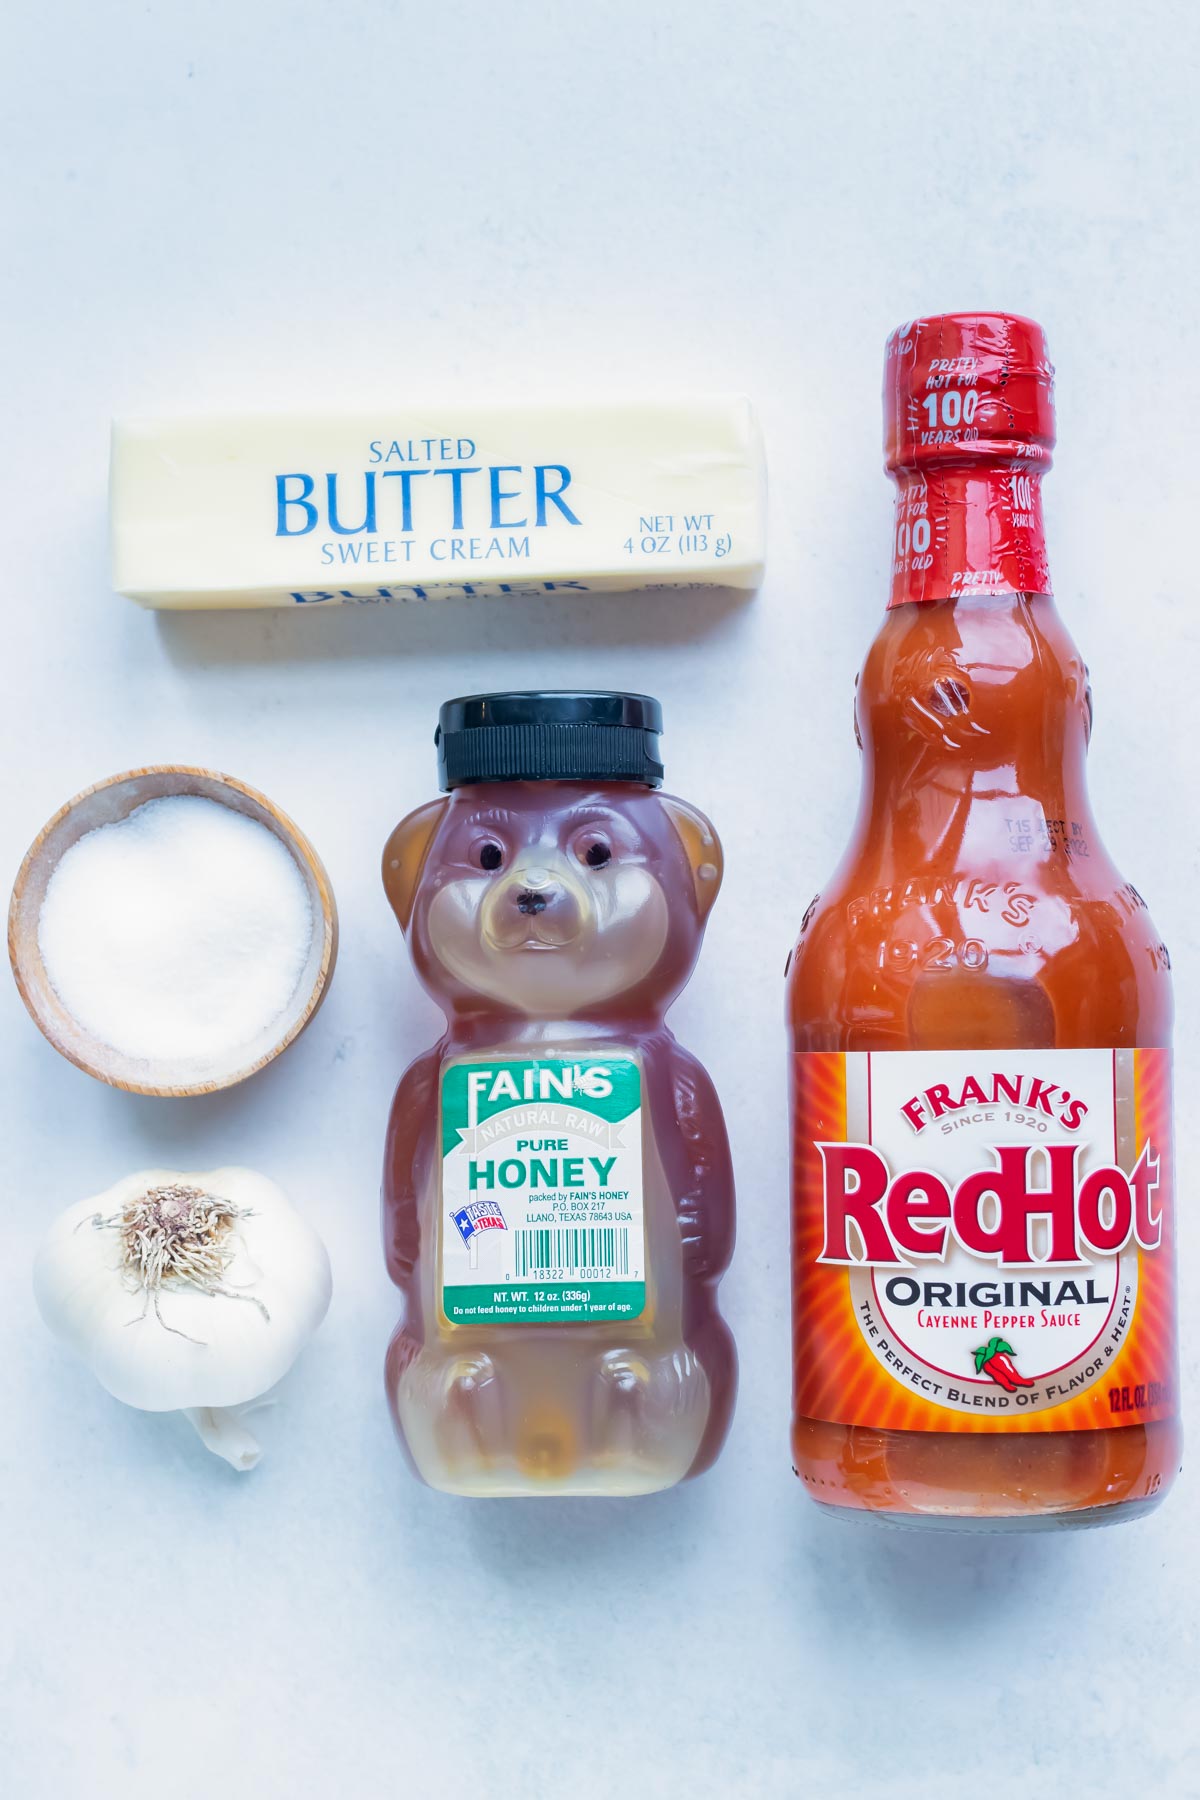 Butter, Hot sauce, honey, garlic, and salt are the ingredients used for this homemade buffalo sauce.